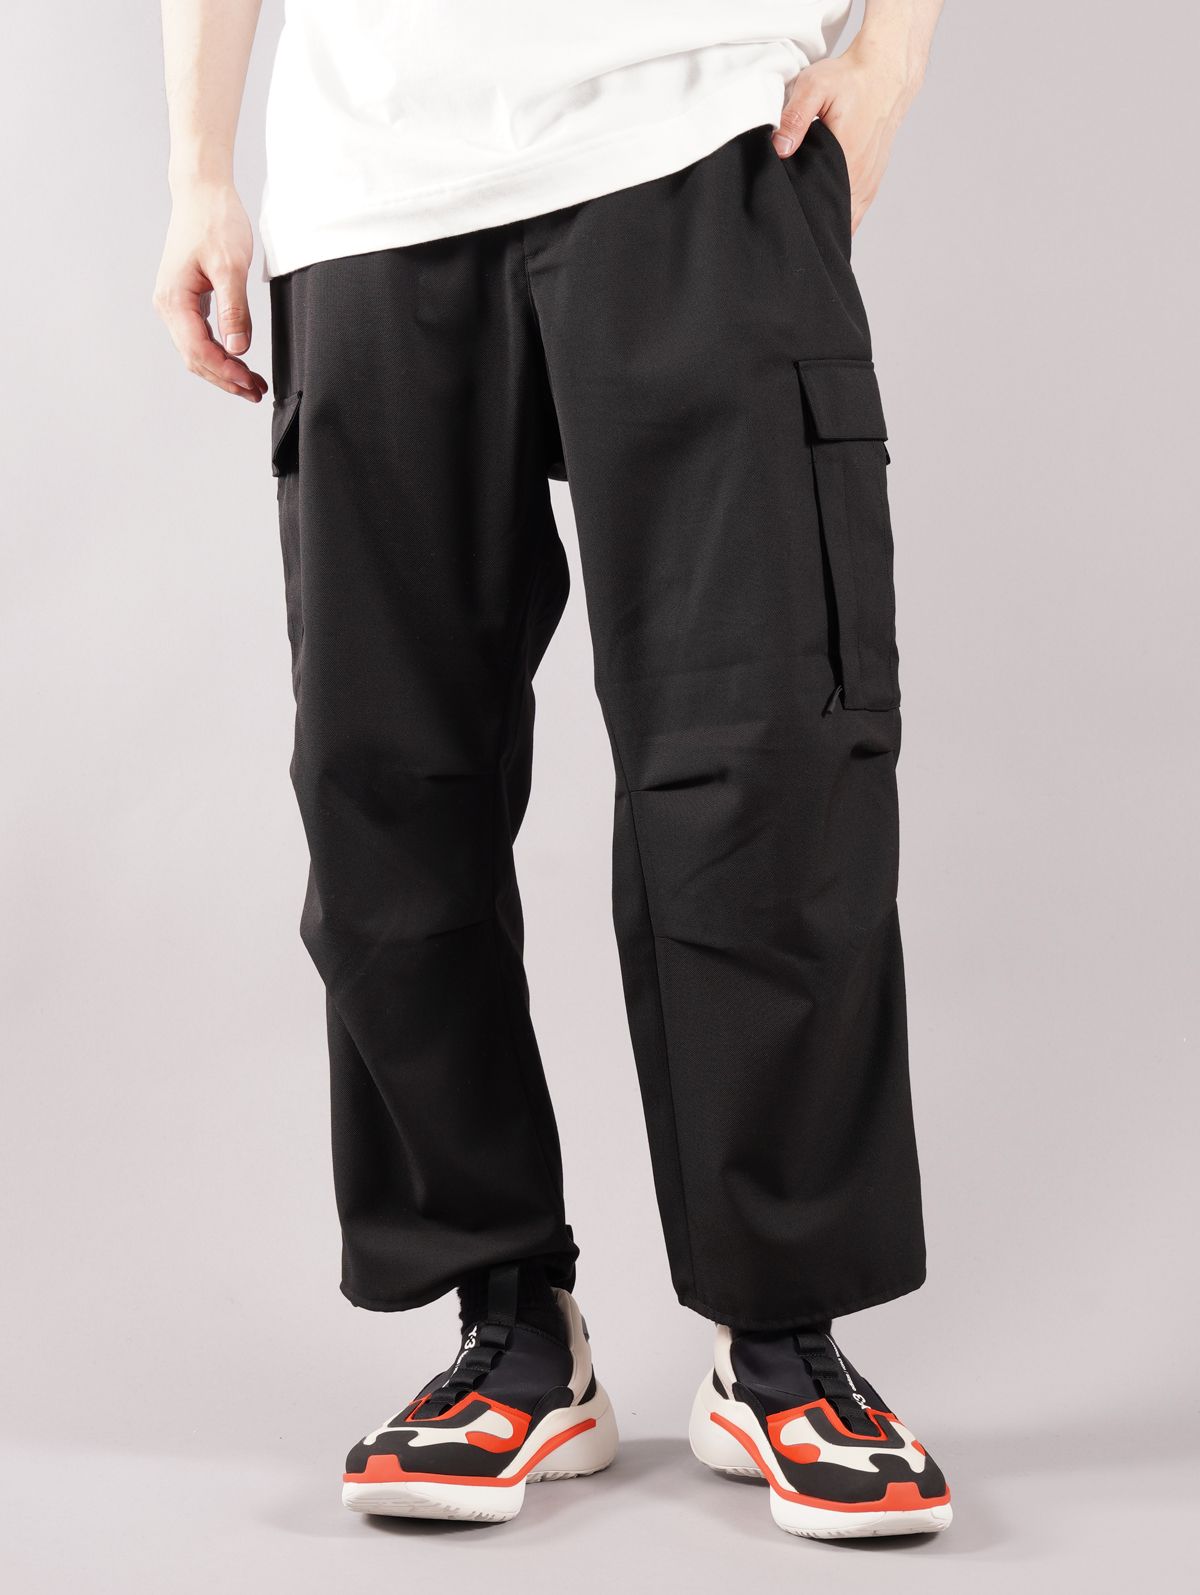 Y-3 - M CLASSIC WINTER WOOL CARGO PANTS / クラシック ウィンター 